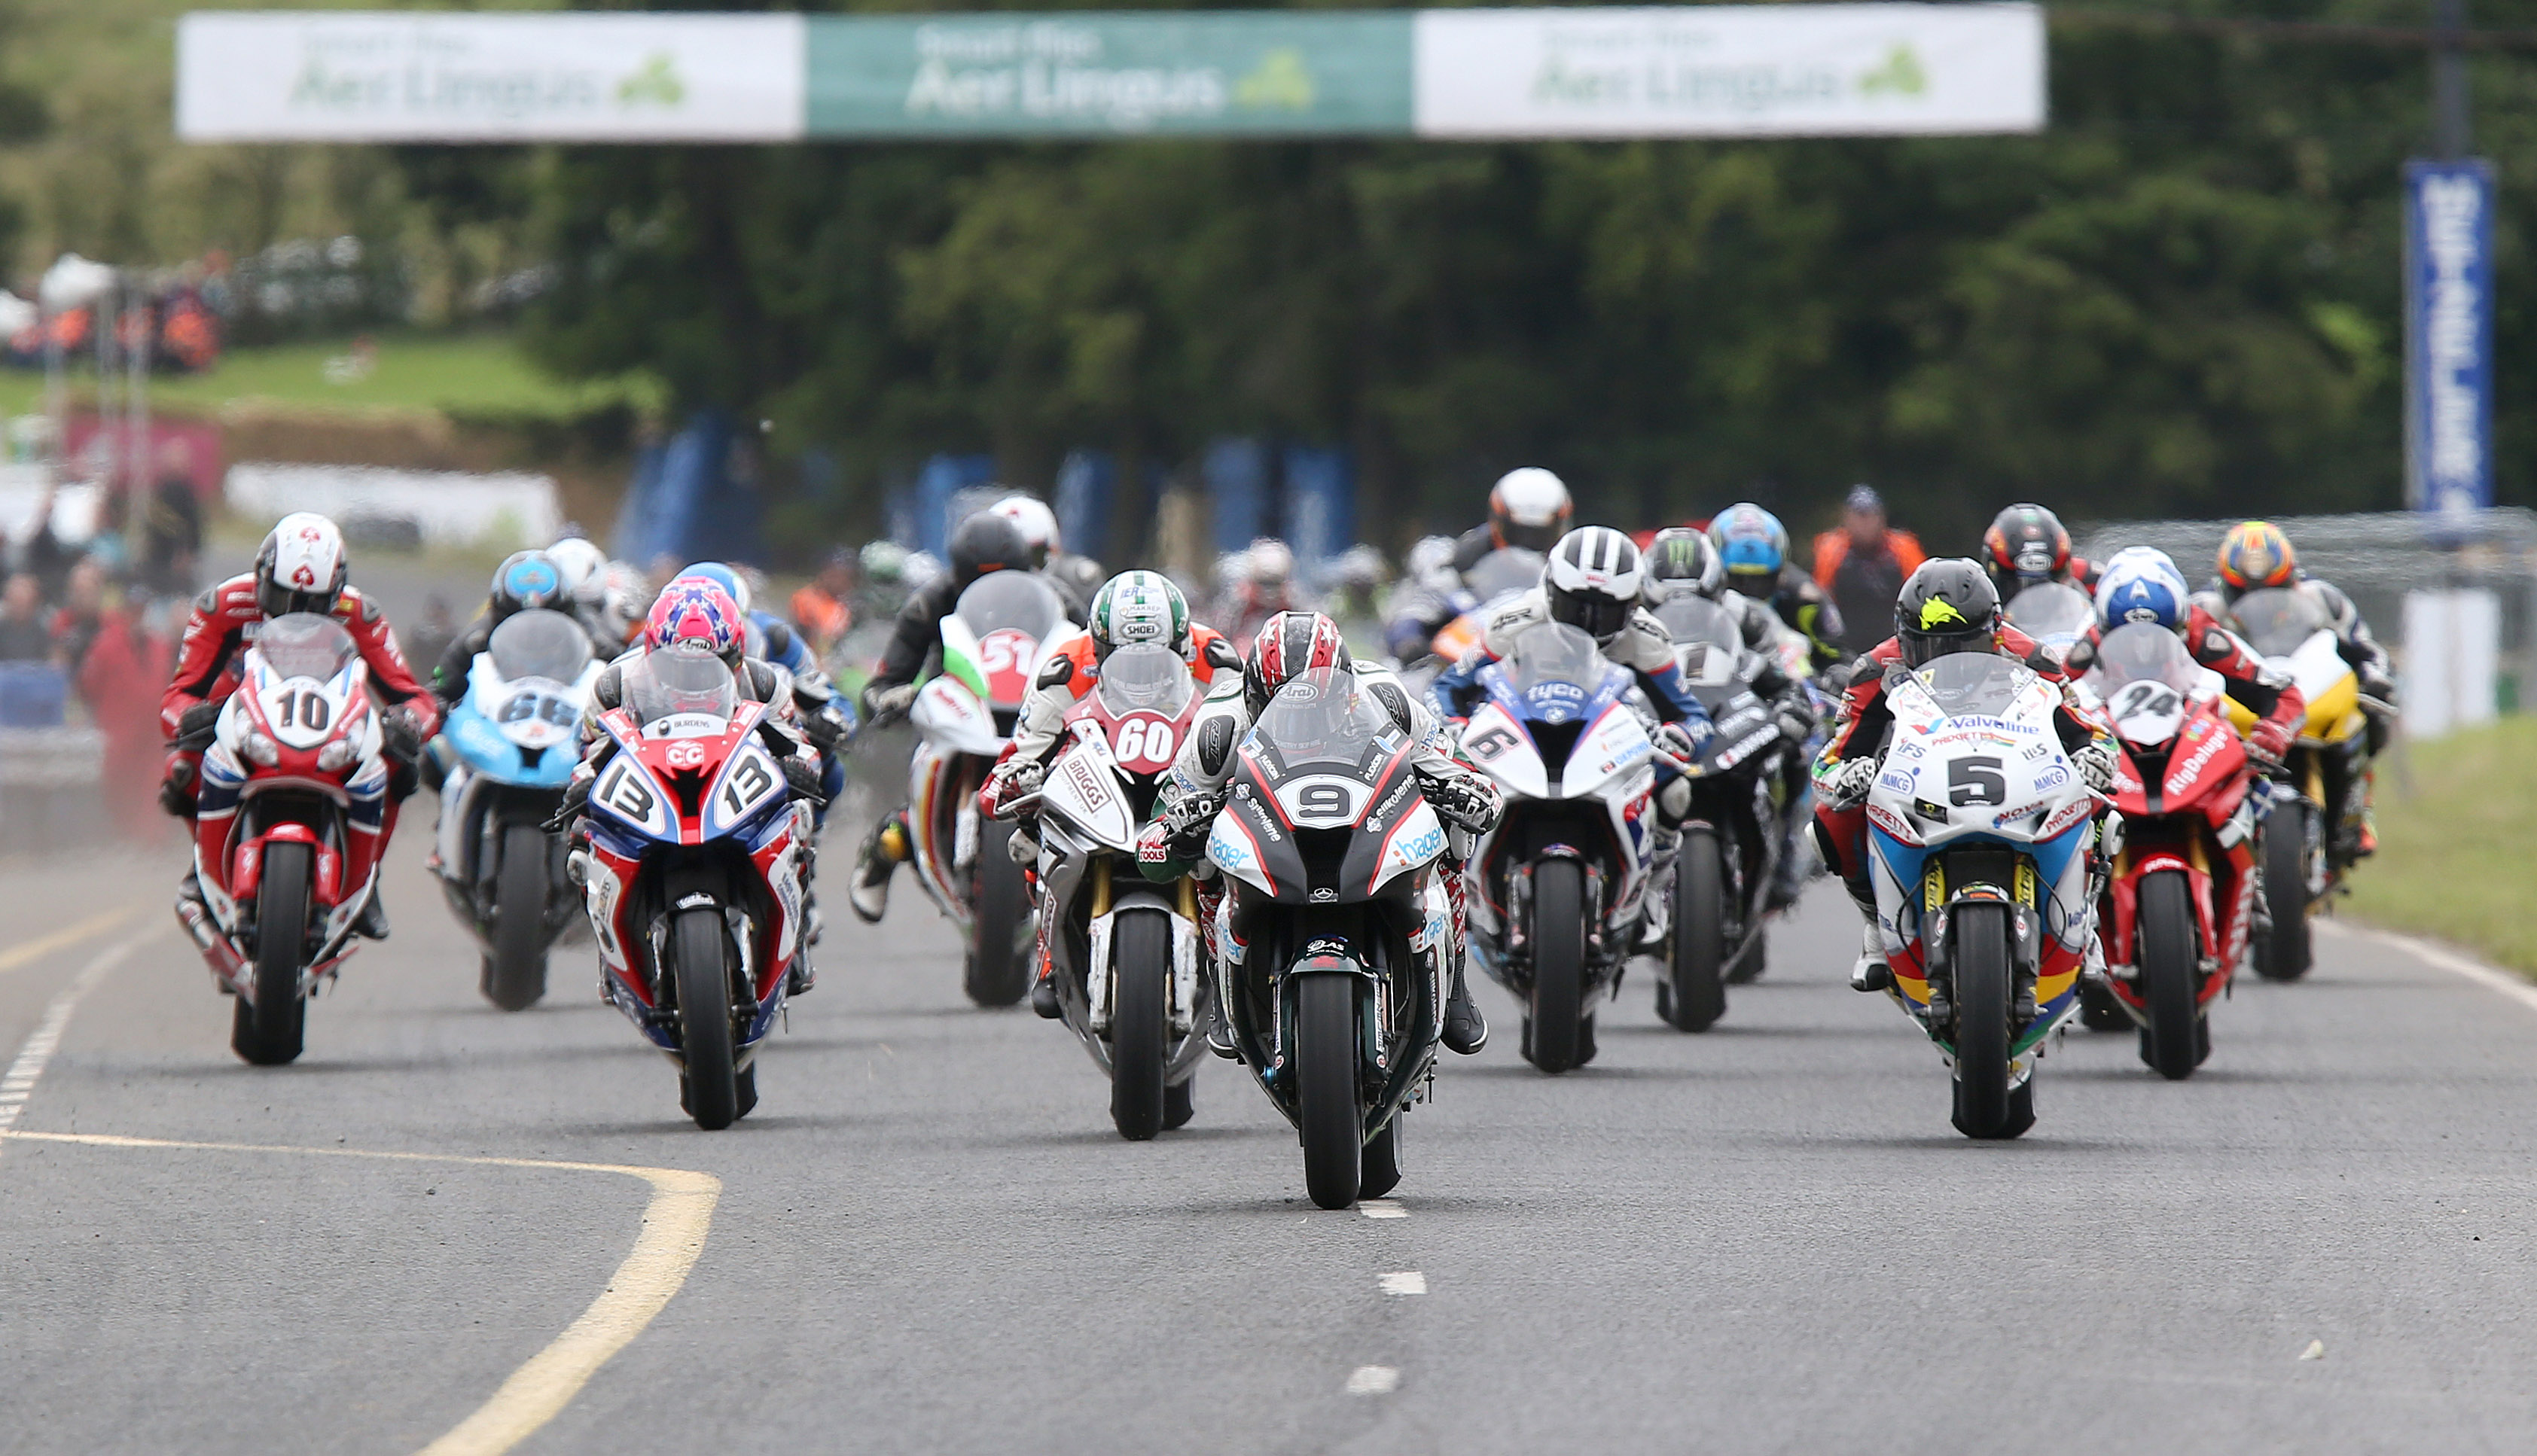 Ulster Grand Prix announces Superpole session for top Superbike qualifiers